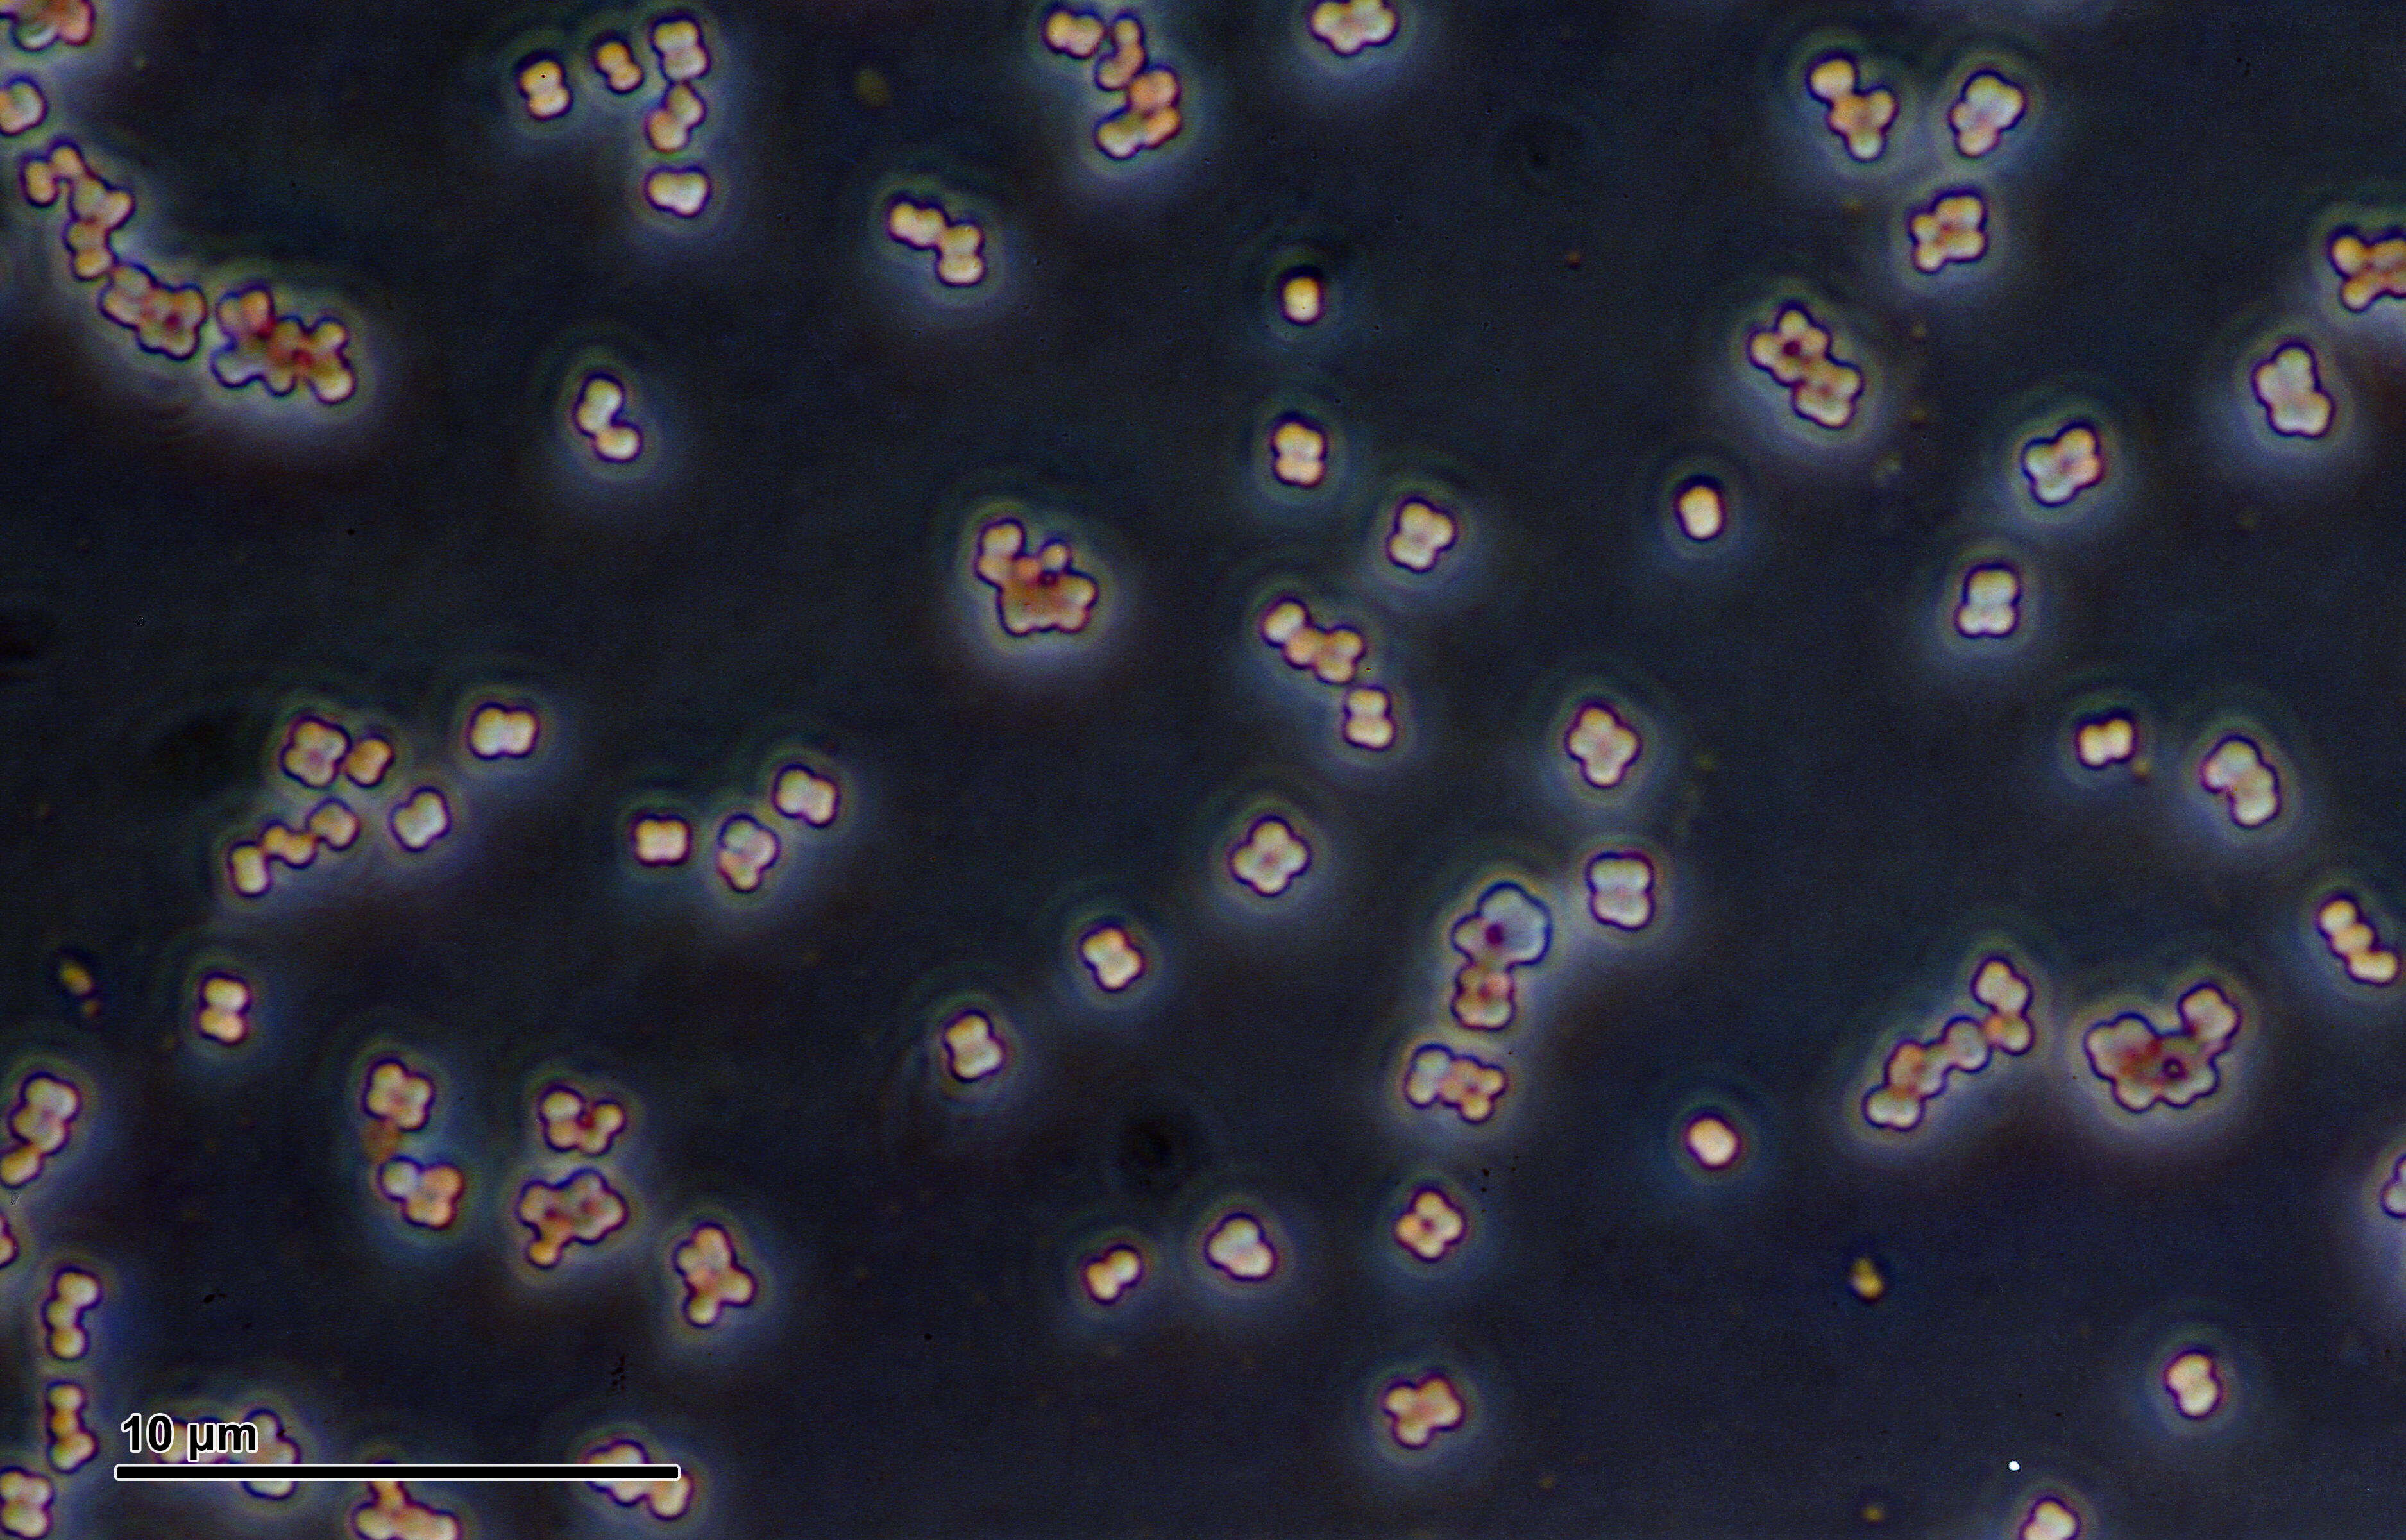 Image of Micrococcus luteus